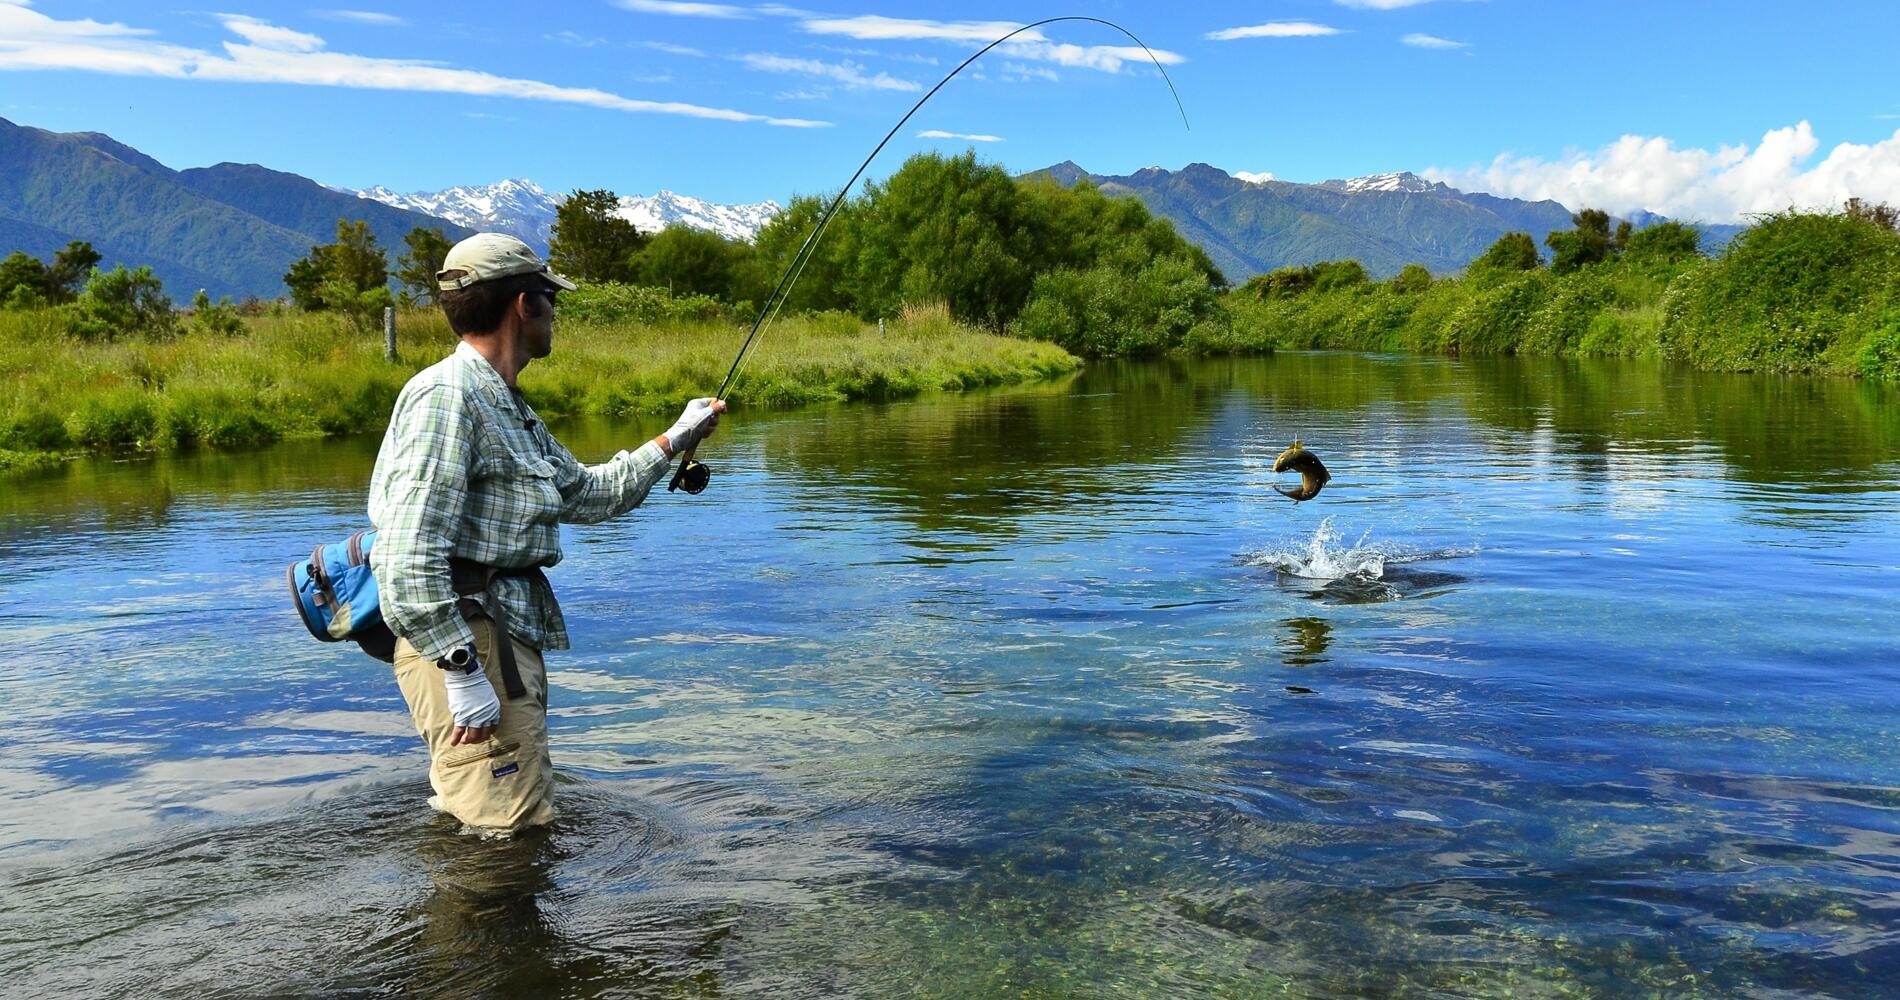 Fly fishing for backpackers =: Backpacking for fly fishermen